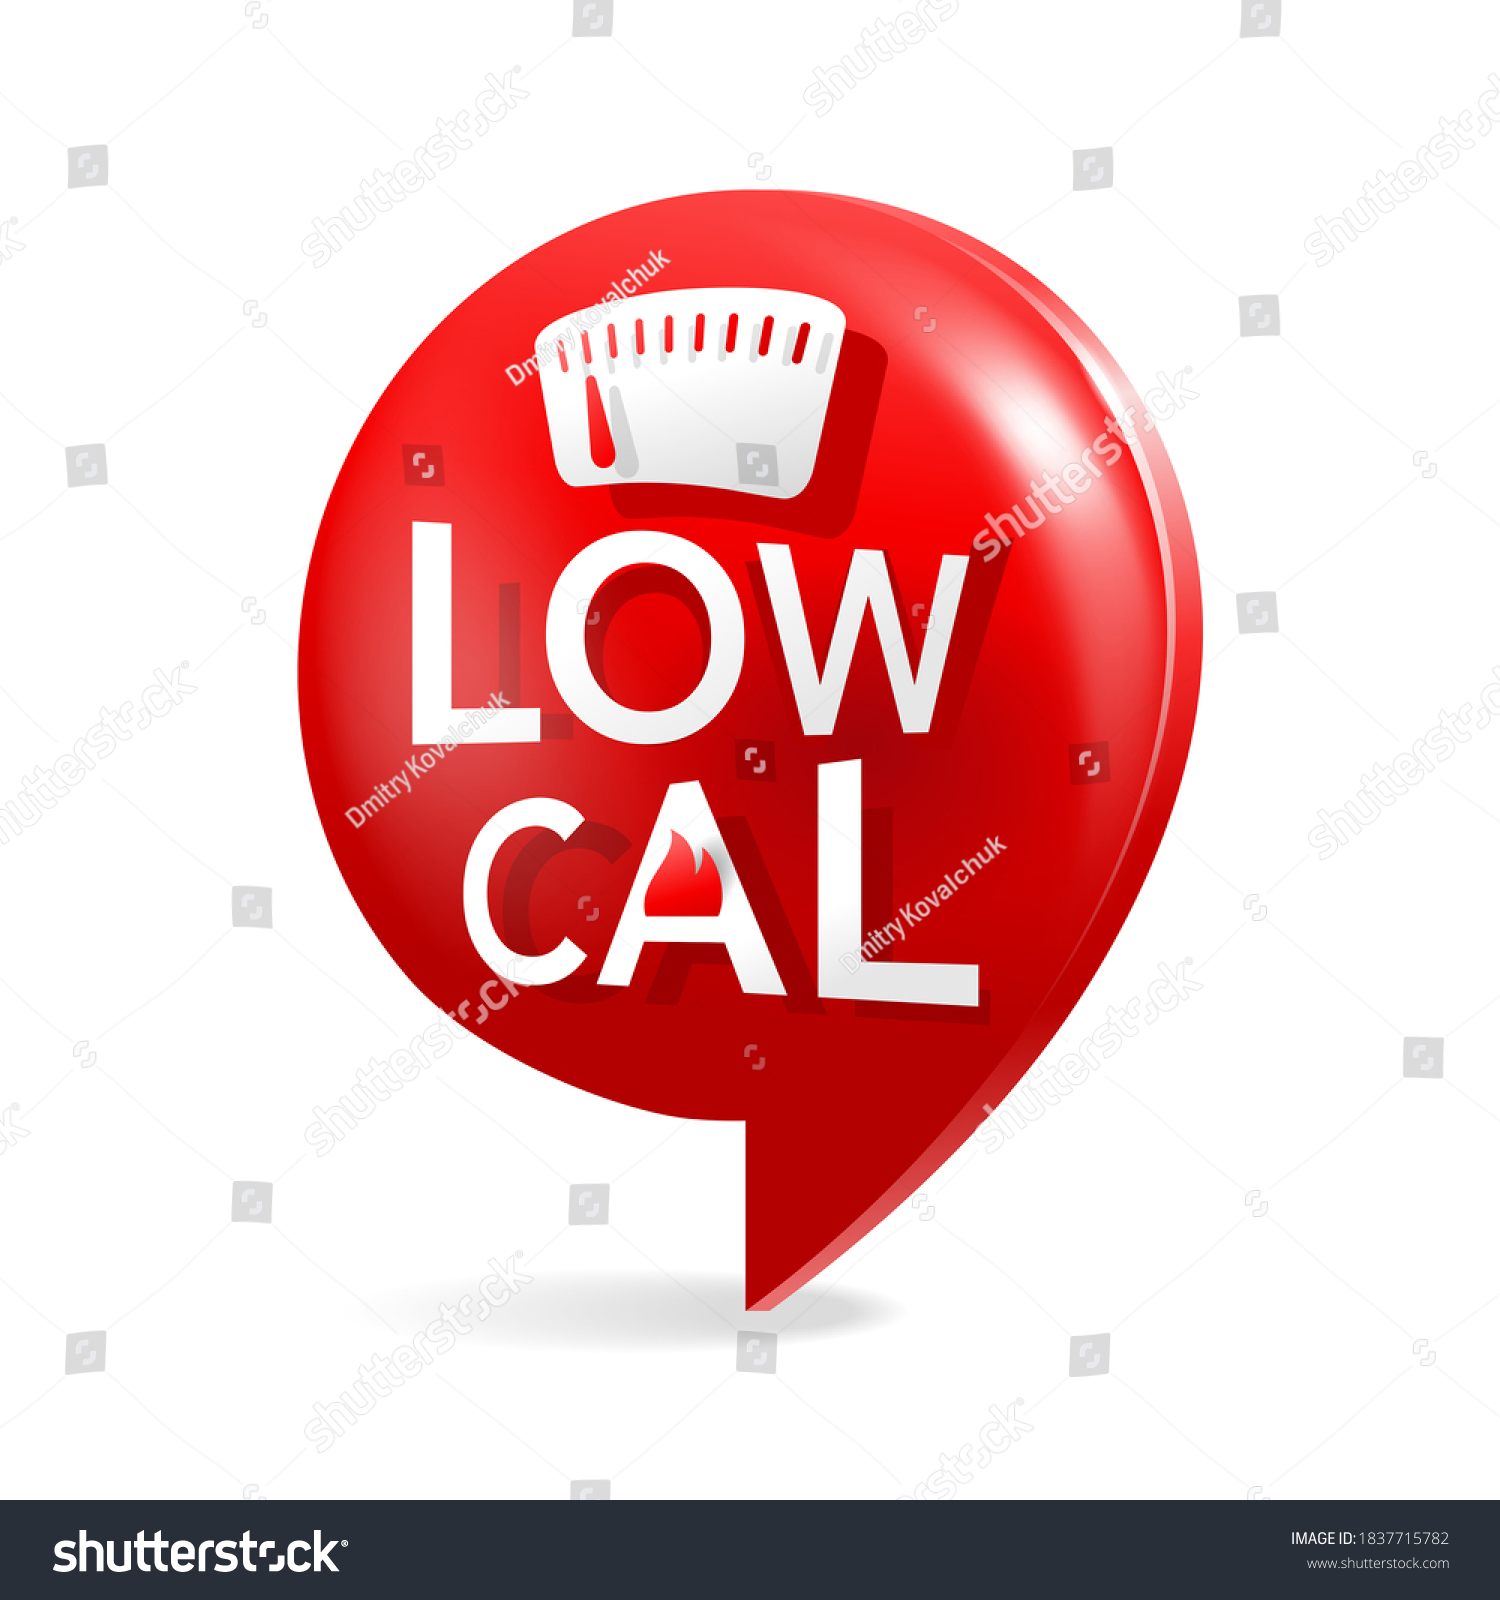 SVG of Low Cal 3D icon - combination of pin mark and weight scales - pictogram for dietary low-cal food products - isolated vector emblem svg